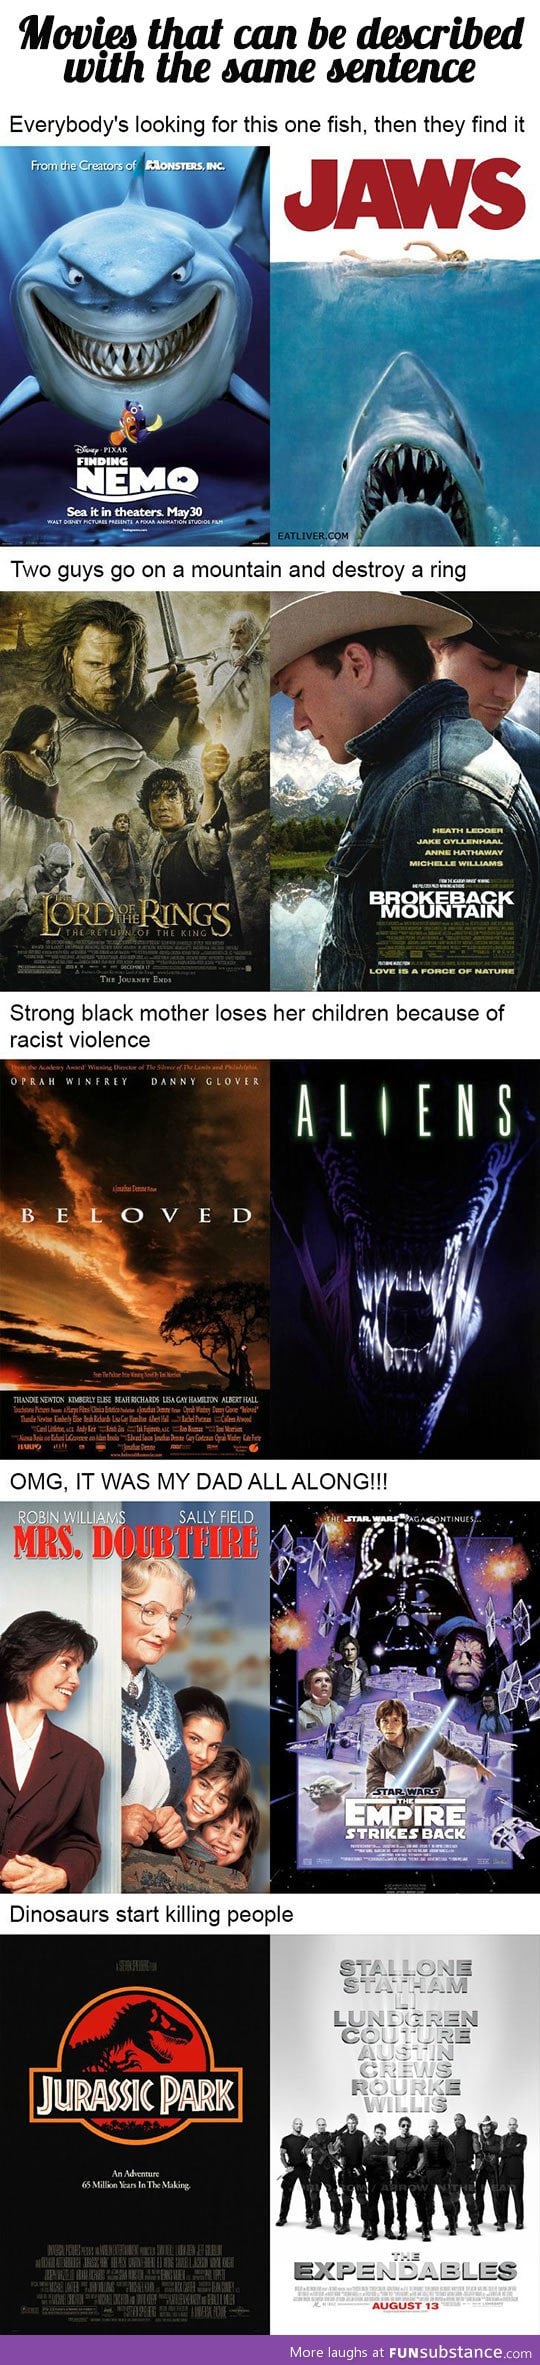 Movies that can be described